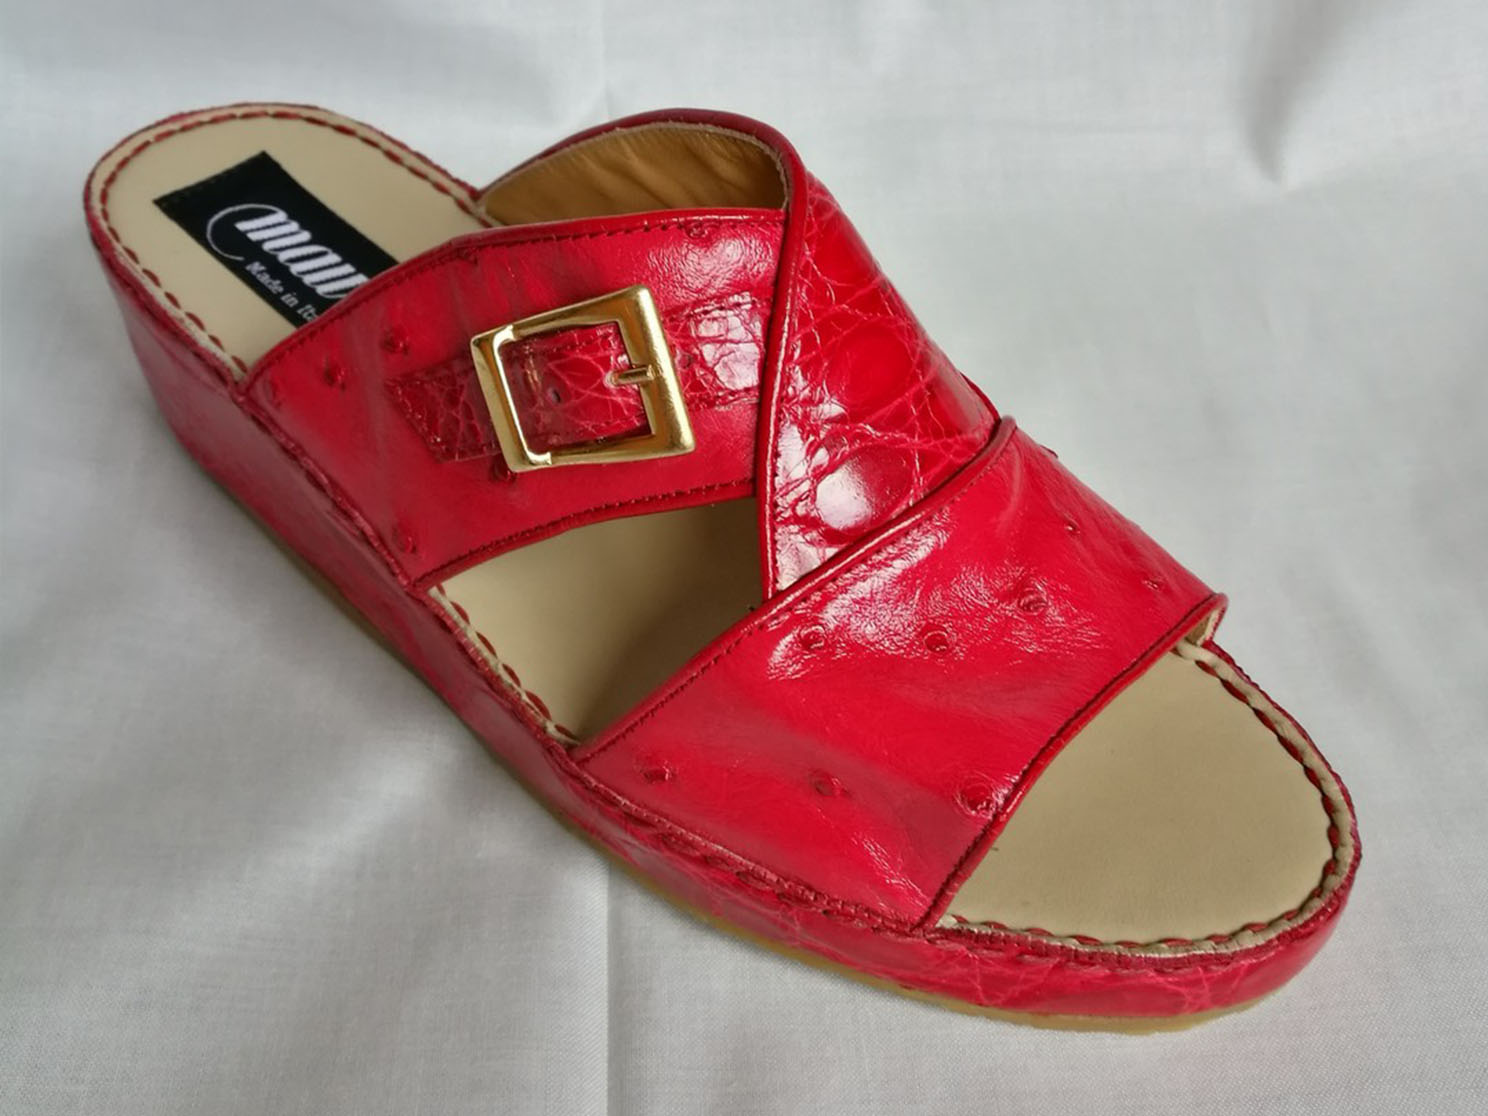 LADY SANDALS FOR AN ARAB PRINCESS SOLD THROUGH A SHOP IN LONDON